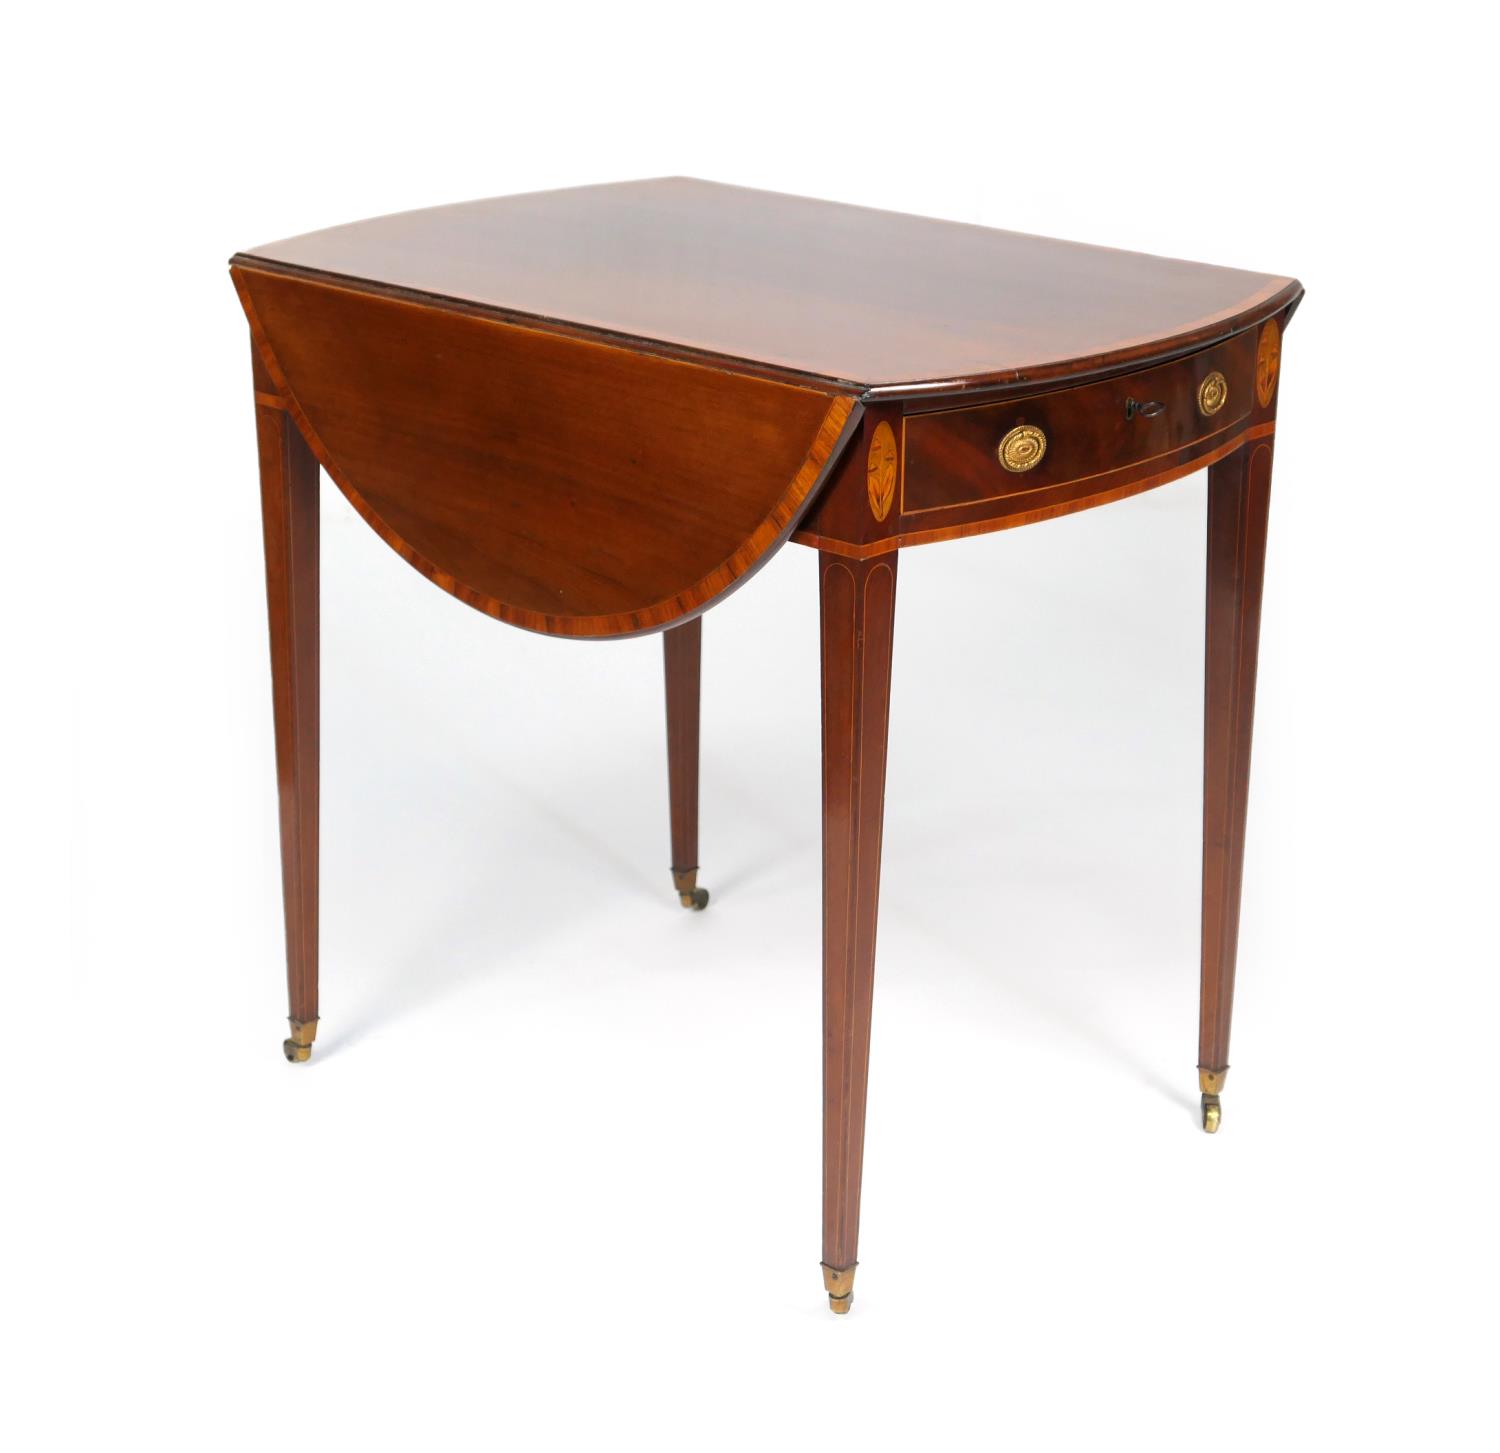 George III mahogany and rosewood banded Pembroke table, circa 1780, the top with two drop leaves